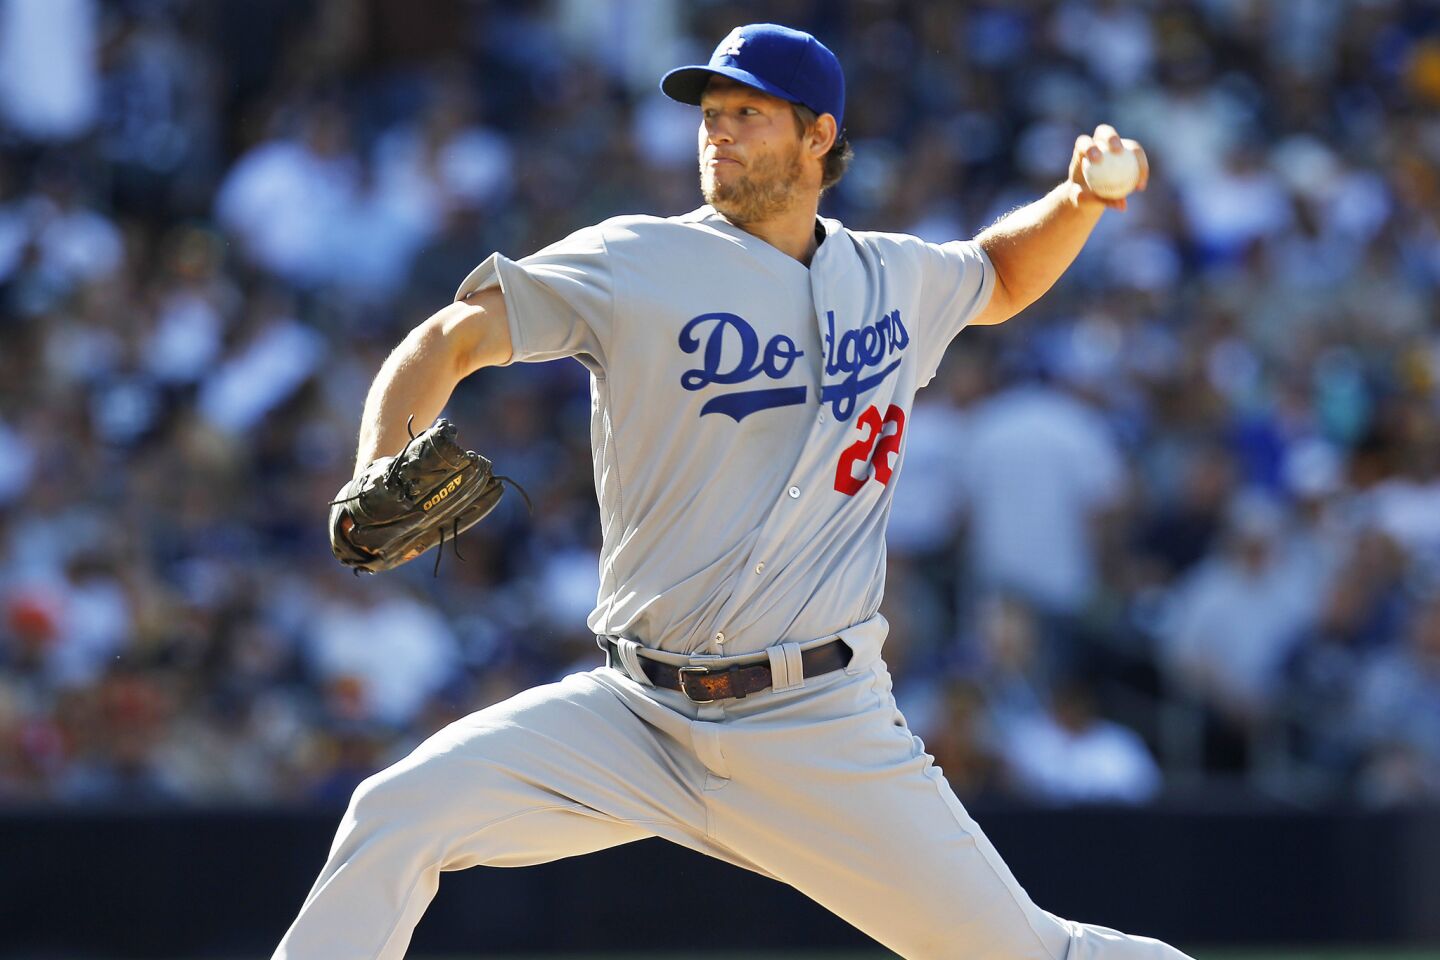 Dodgers dominant in 15-0 opening day win at San Diego